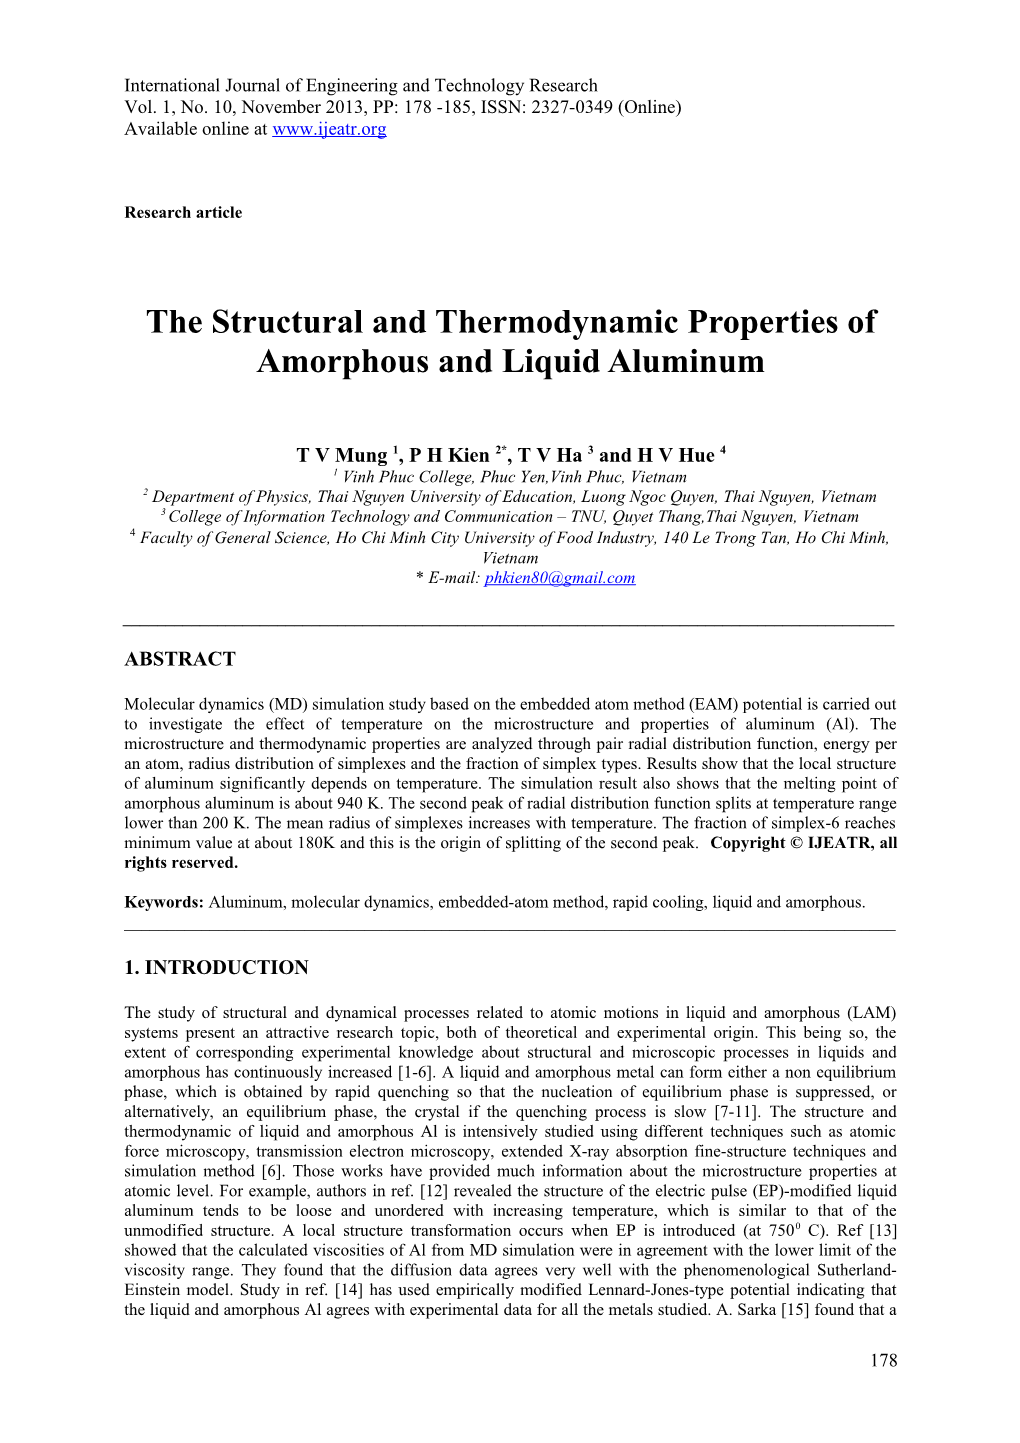 The Structural and Thermodynamic Properties of Amorphous and Liquid Aluminum